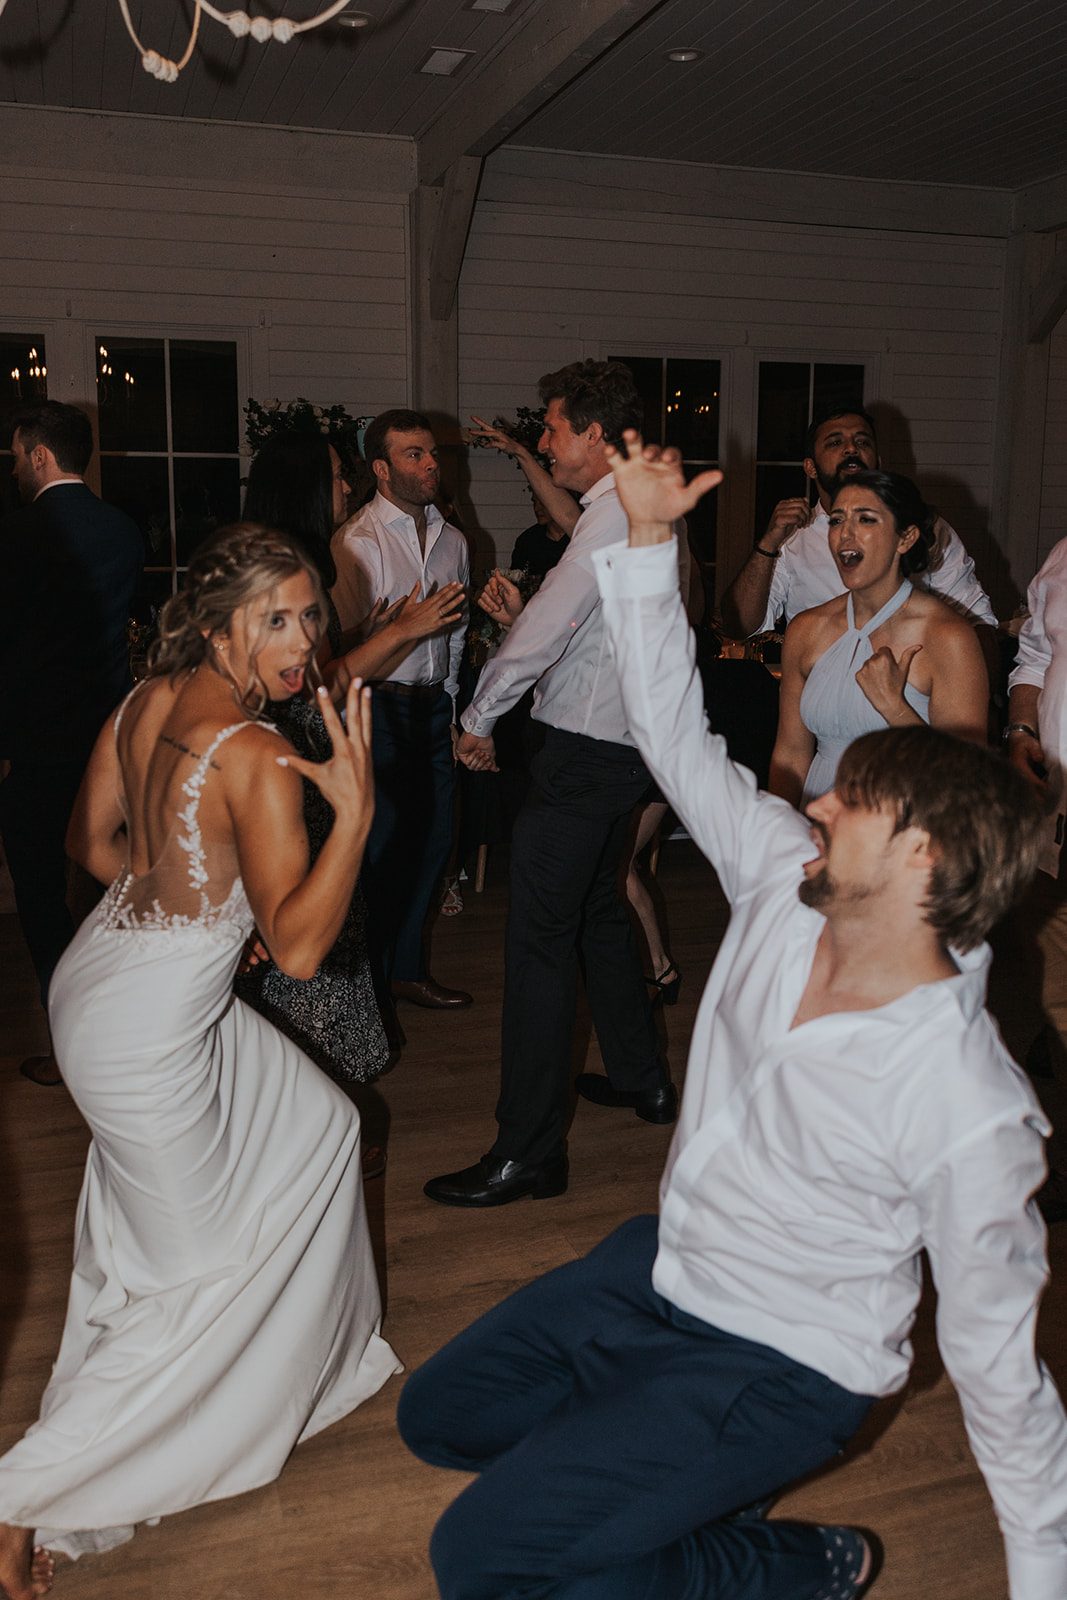 Stunning bride and groom dance with their guests at the end of their dreamy Georgia wedding day!